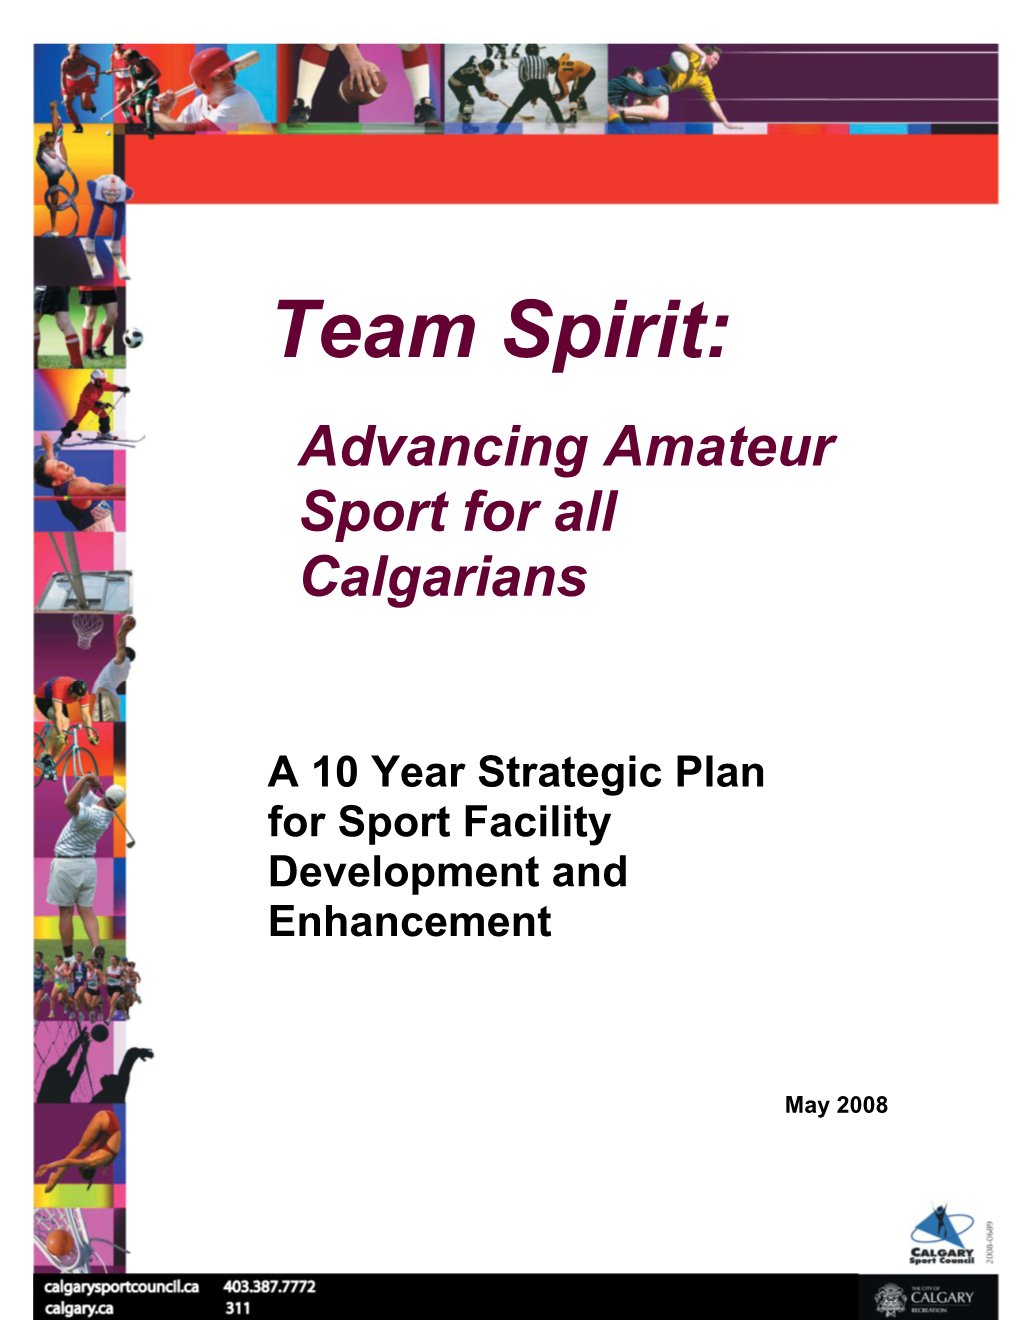 10 Year Strategic Plan for Sport Facility Development and Enhancement